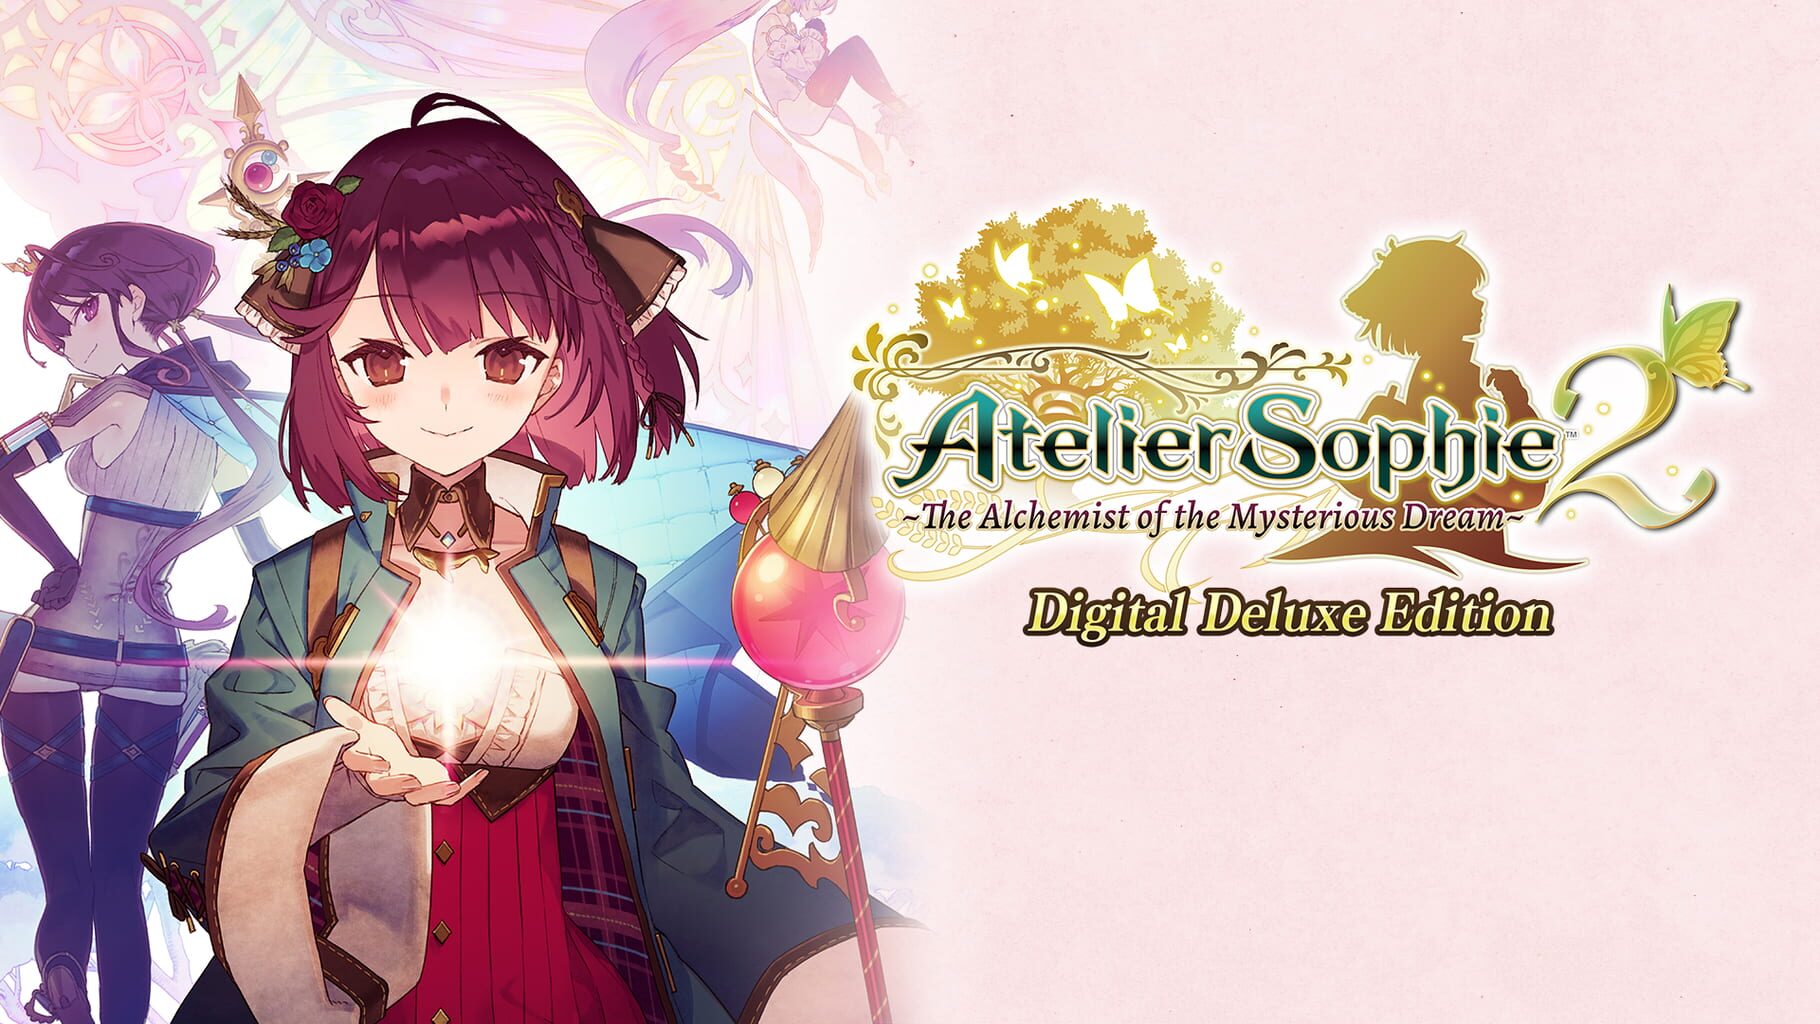 Atelier Sophie 2: The Alchemist of the Mysterious Dream - Digital Deluxe Edition artwork